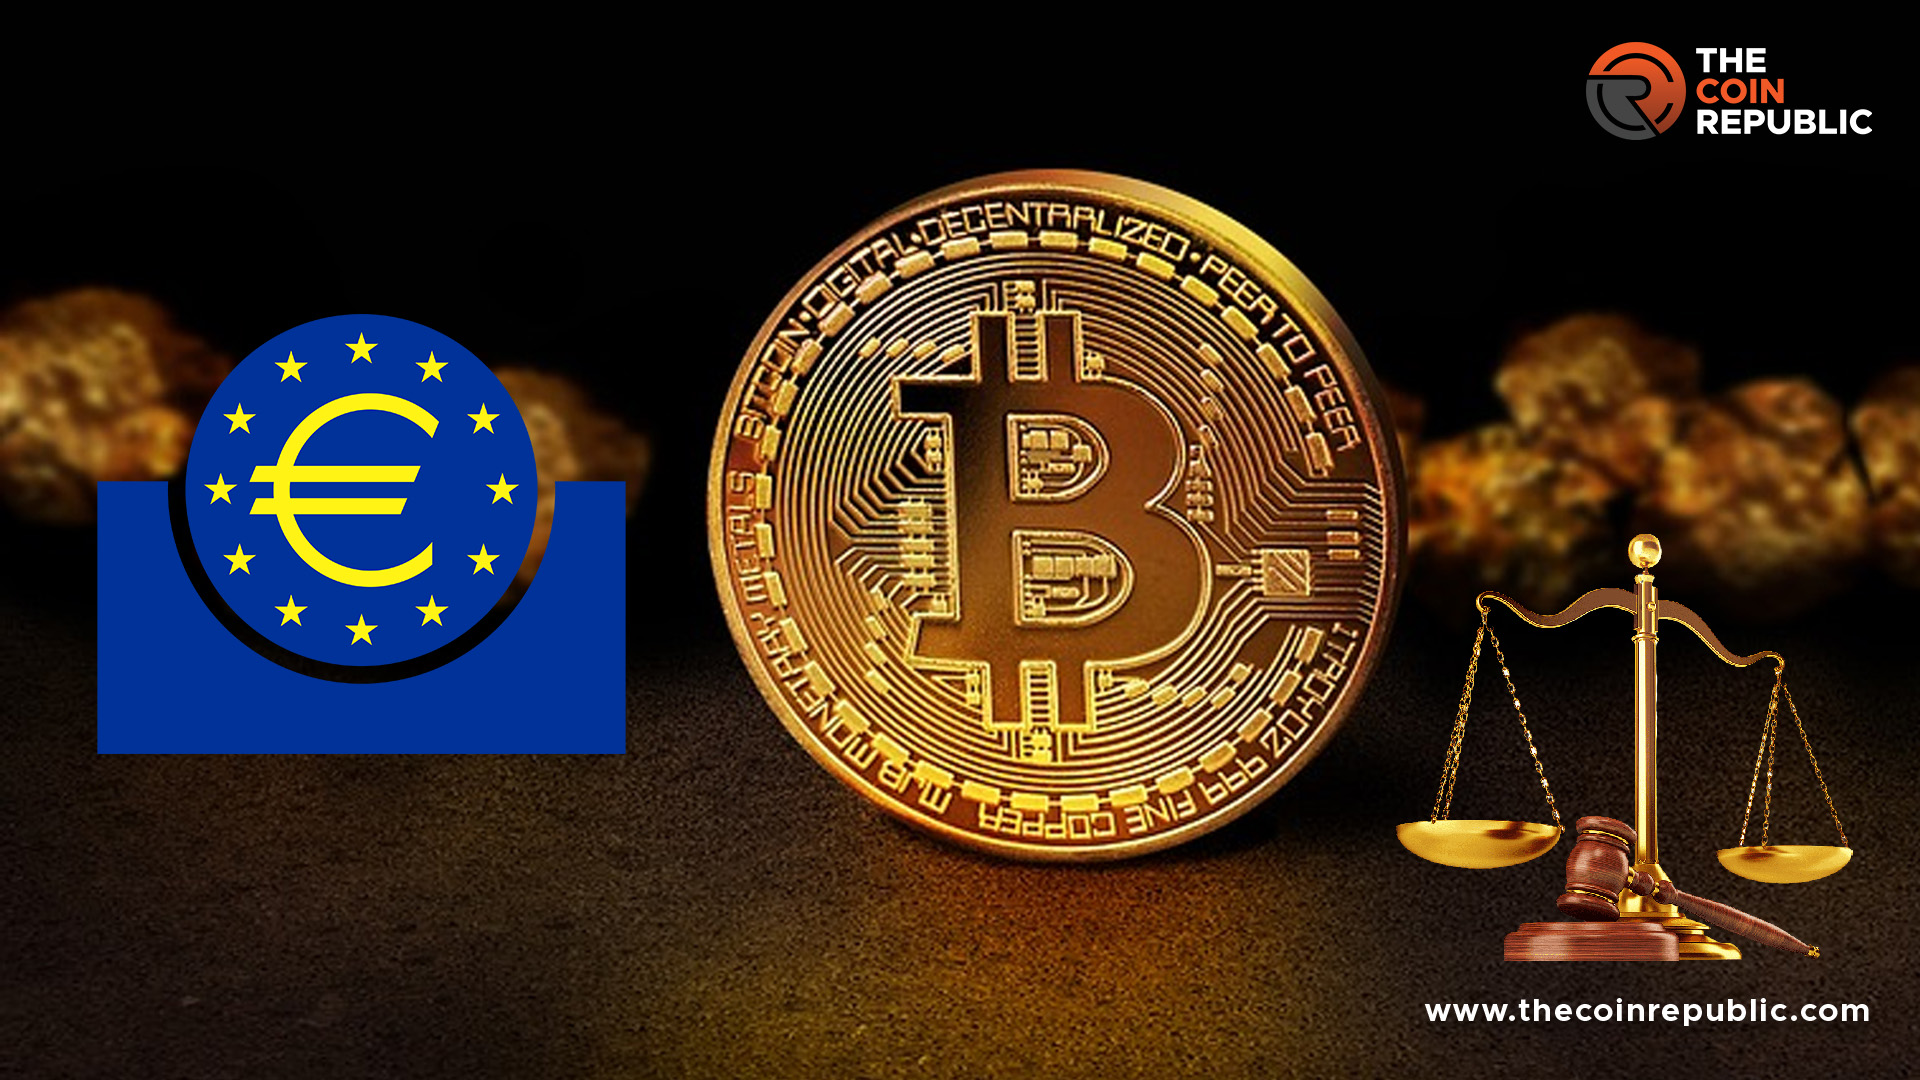 Trading in unbacked digital assets should be treated as gambling: ECB Executive board member